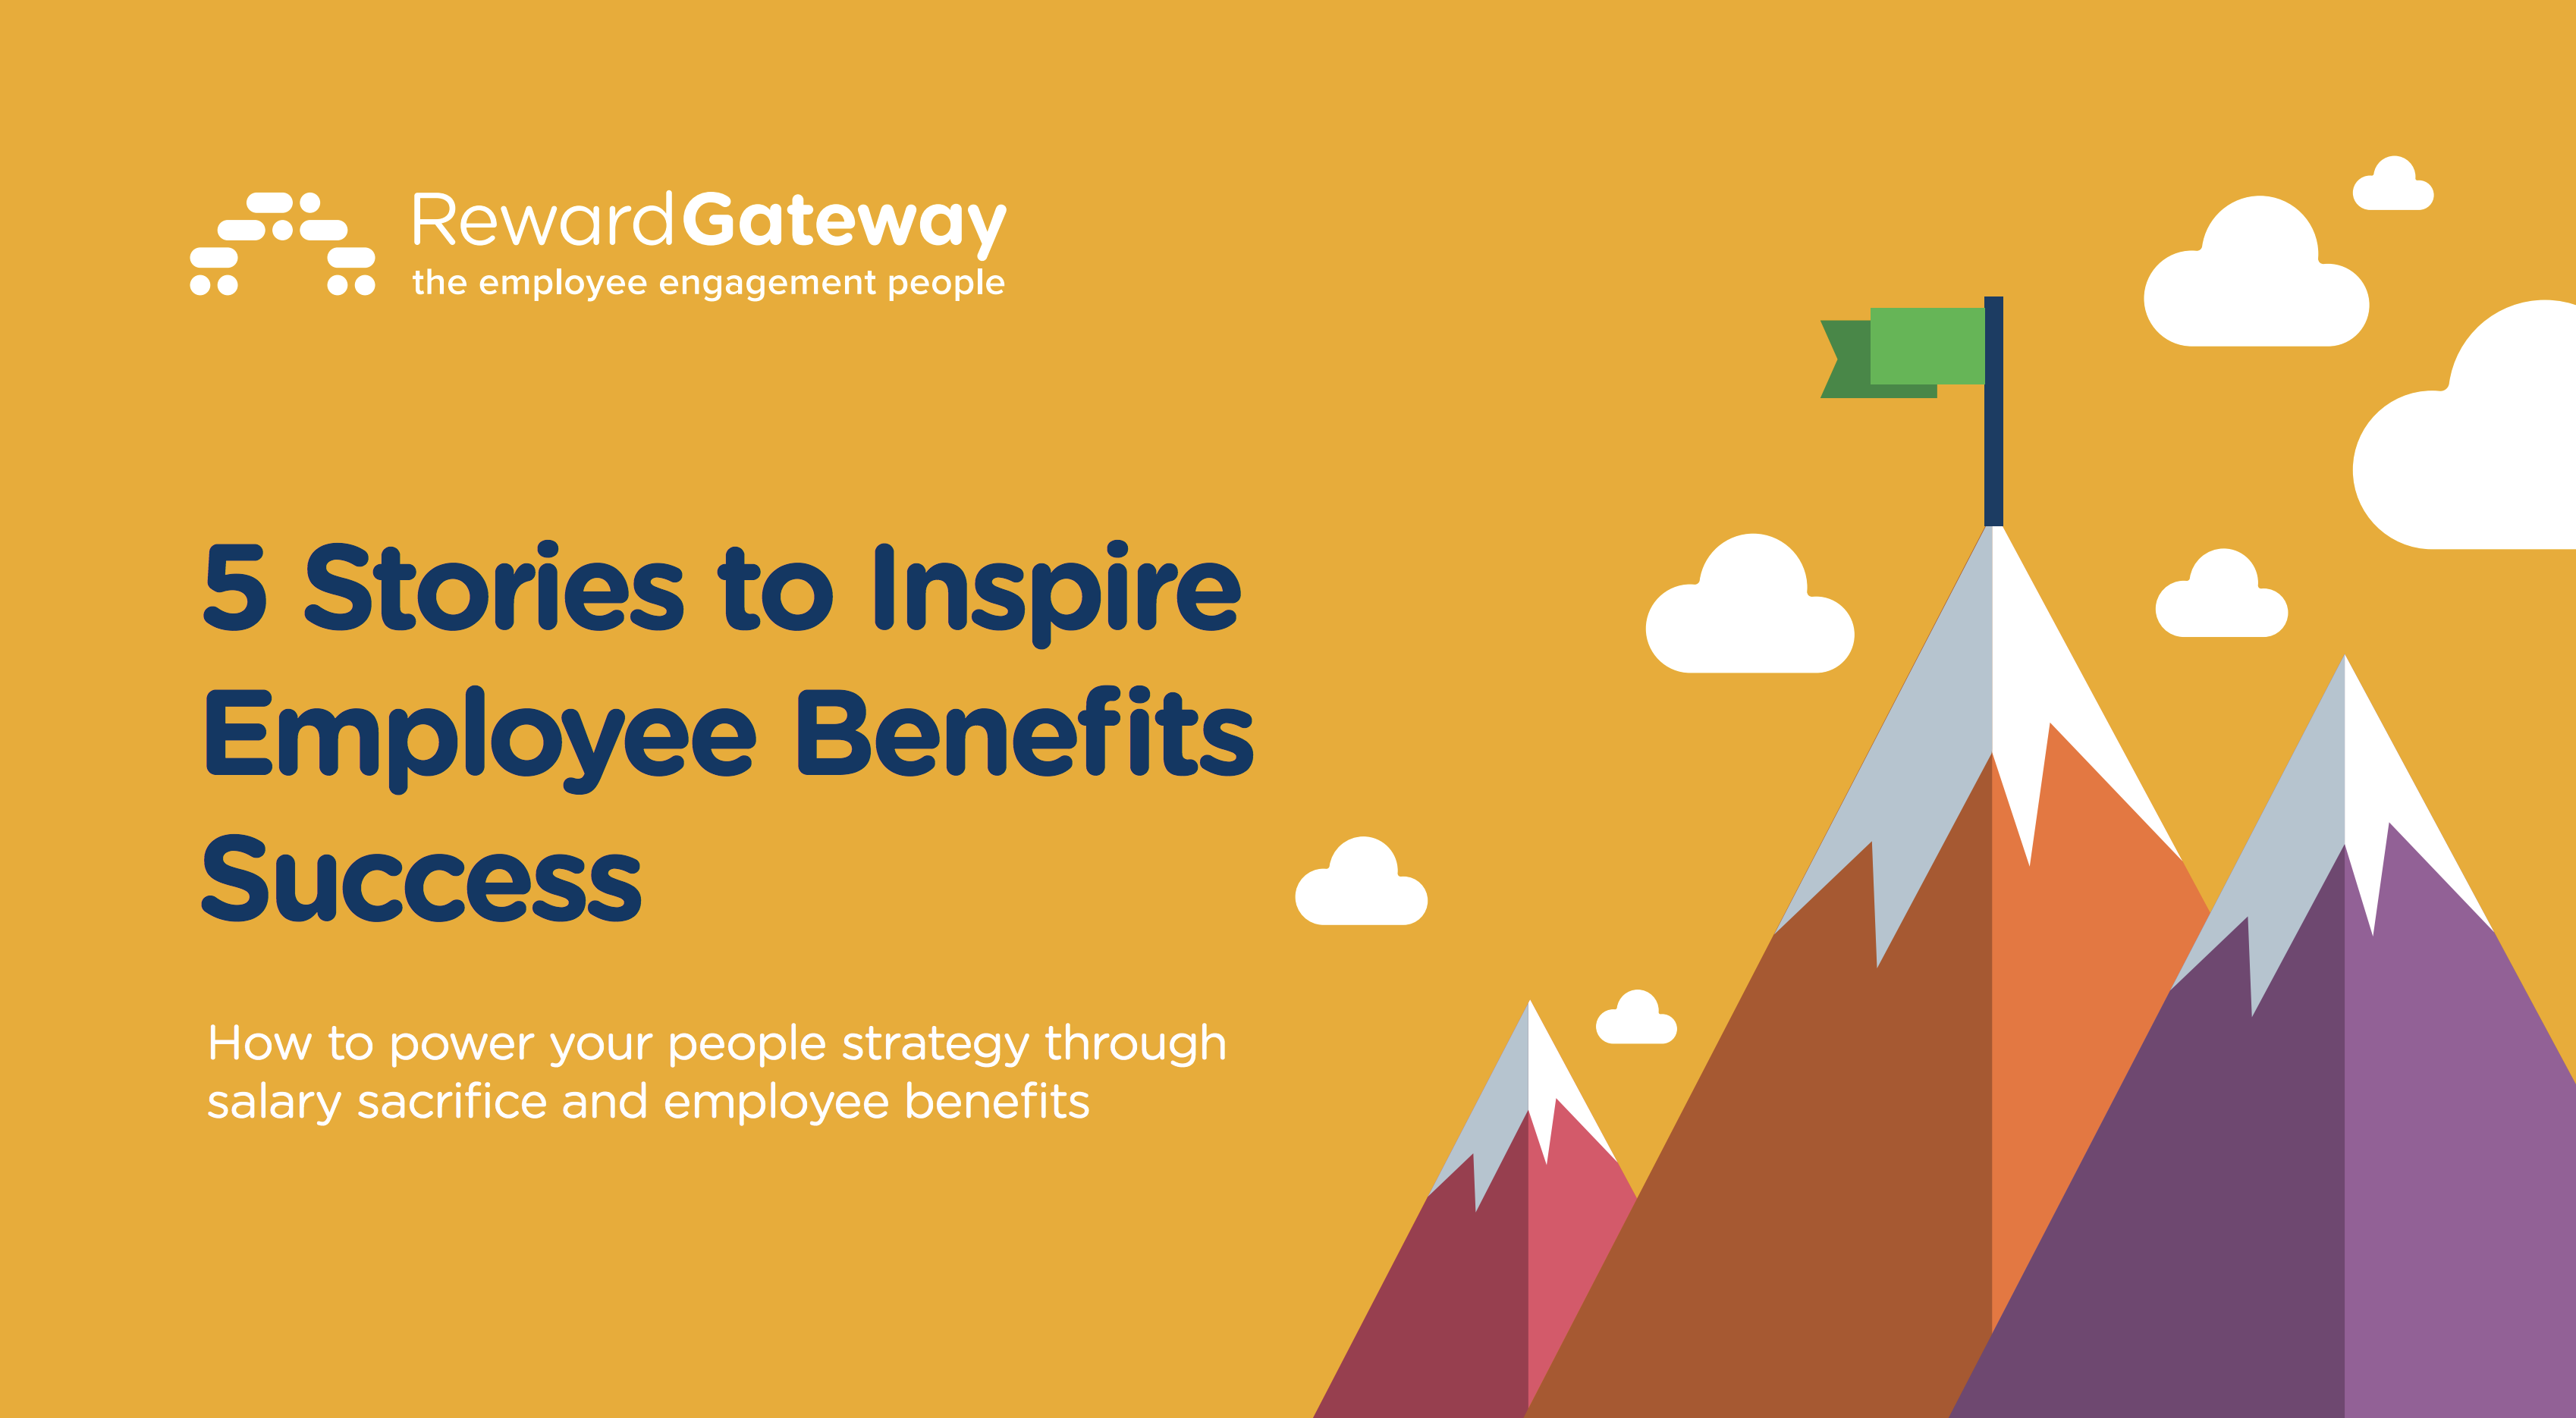 How to make employee benefits successful